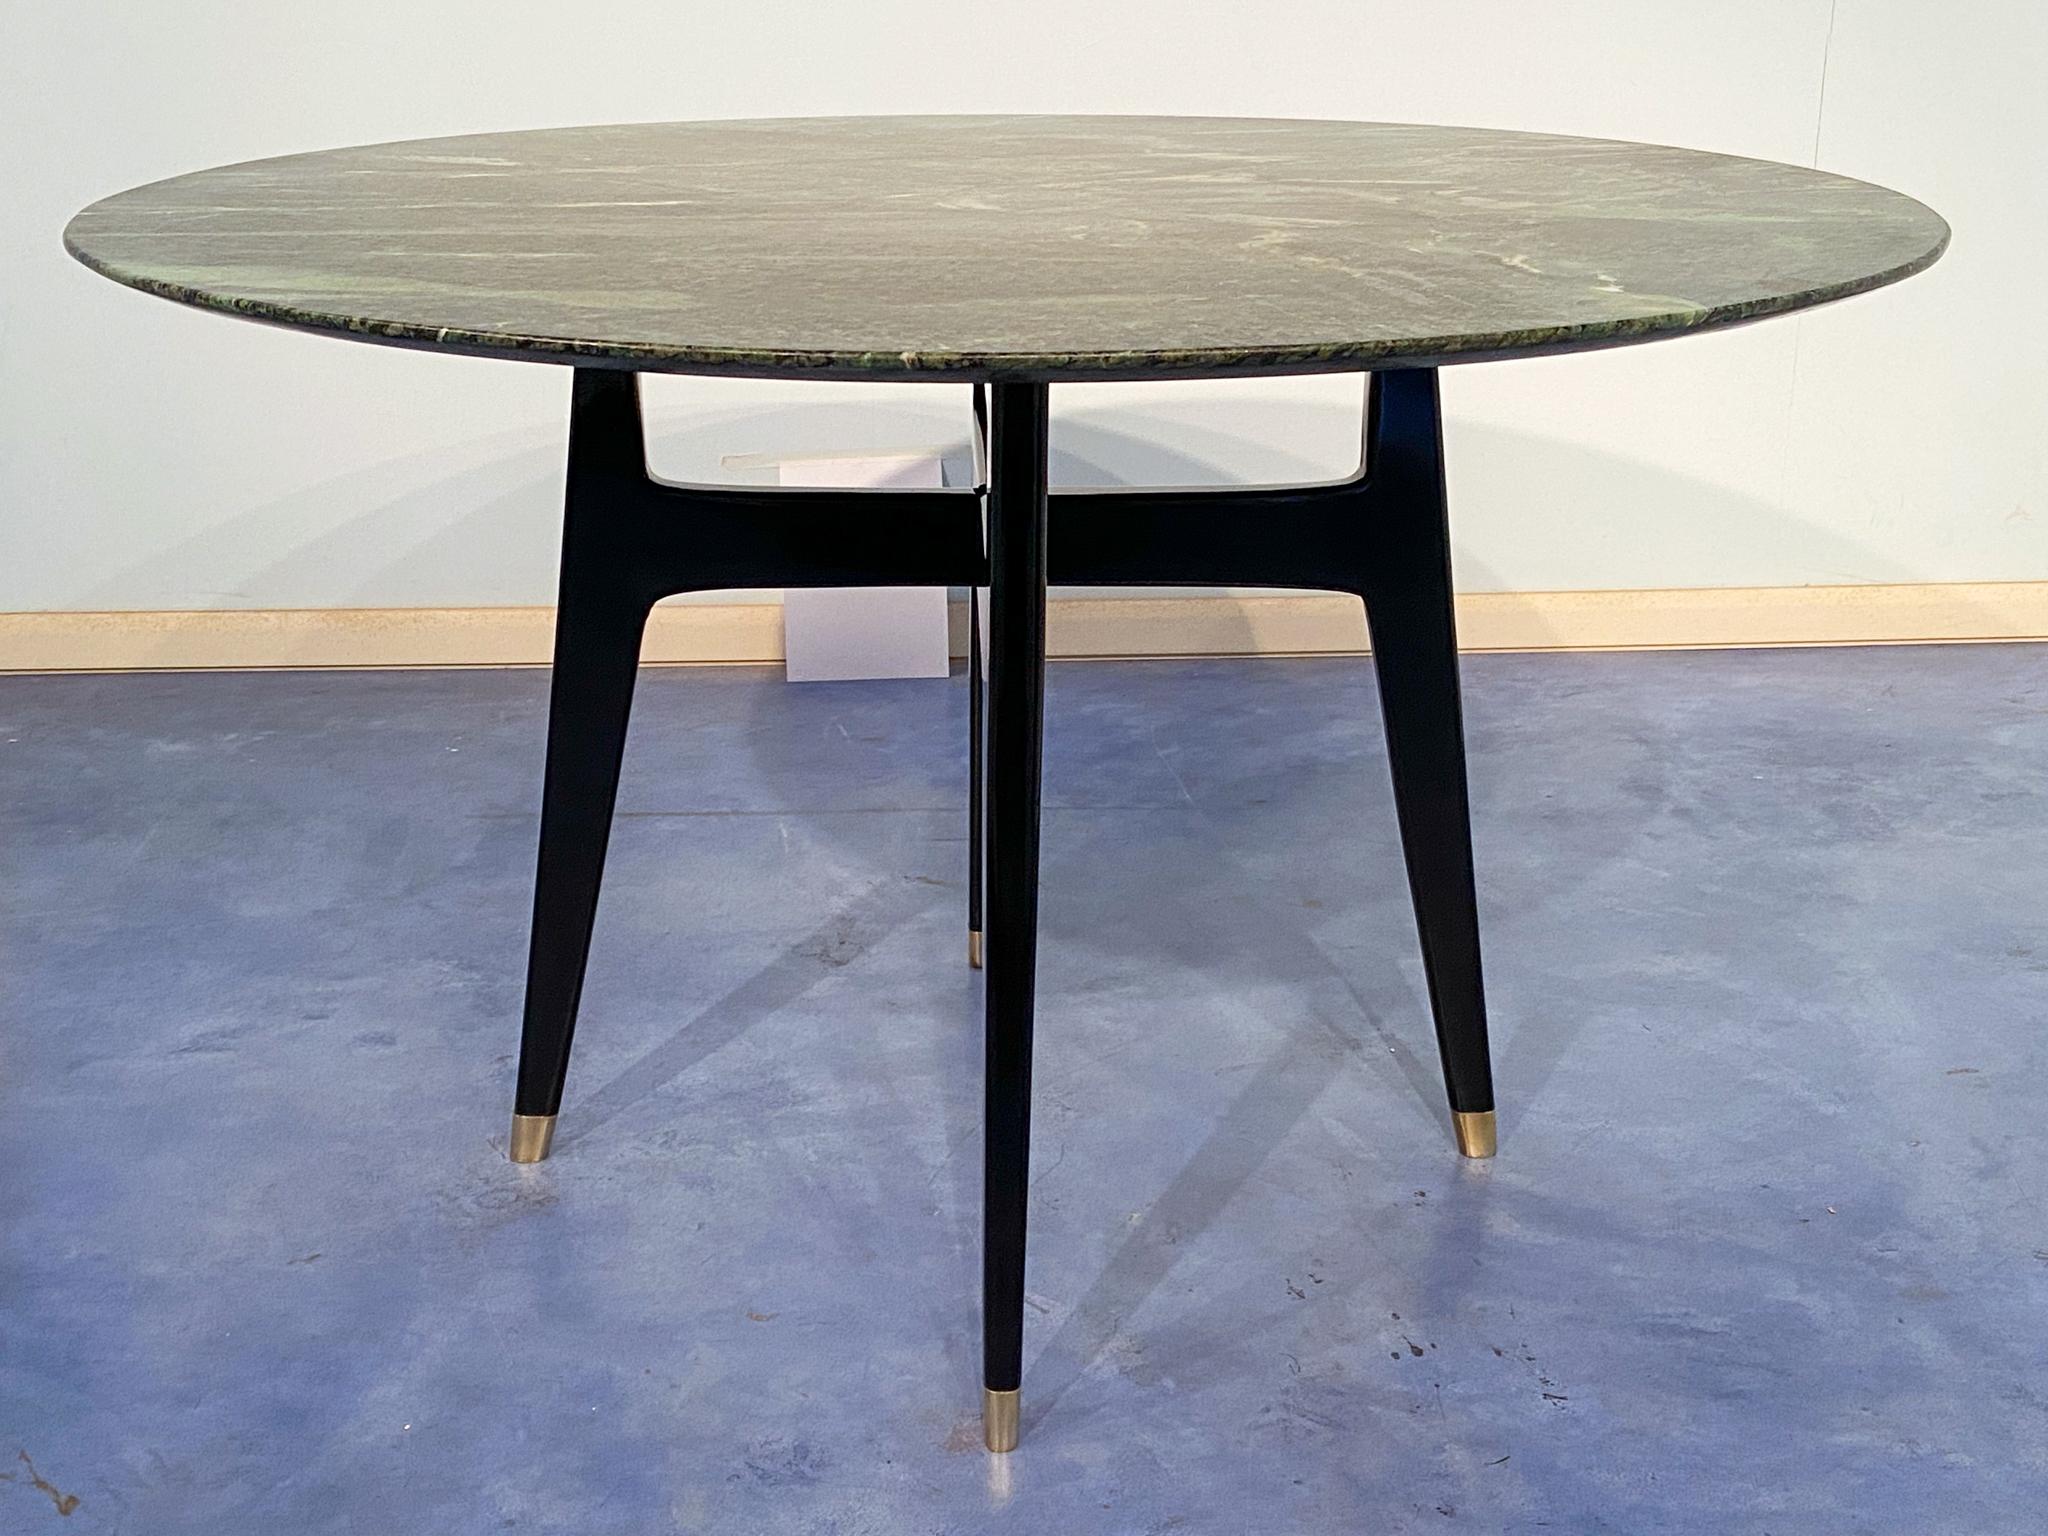 Italian Mid-Century  Marble Round Support or Center Table, by  Dassi 1950s For Sale 5